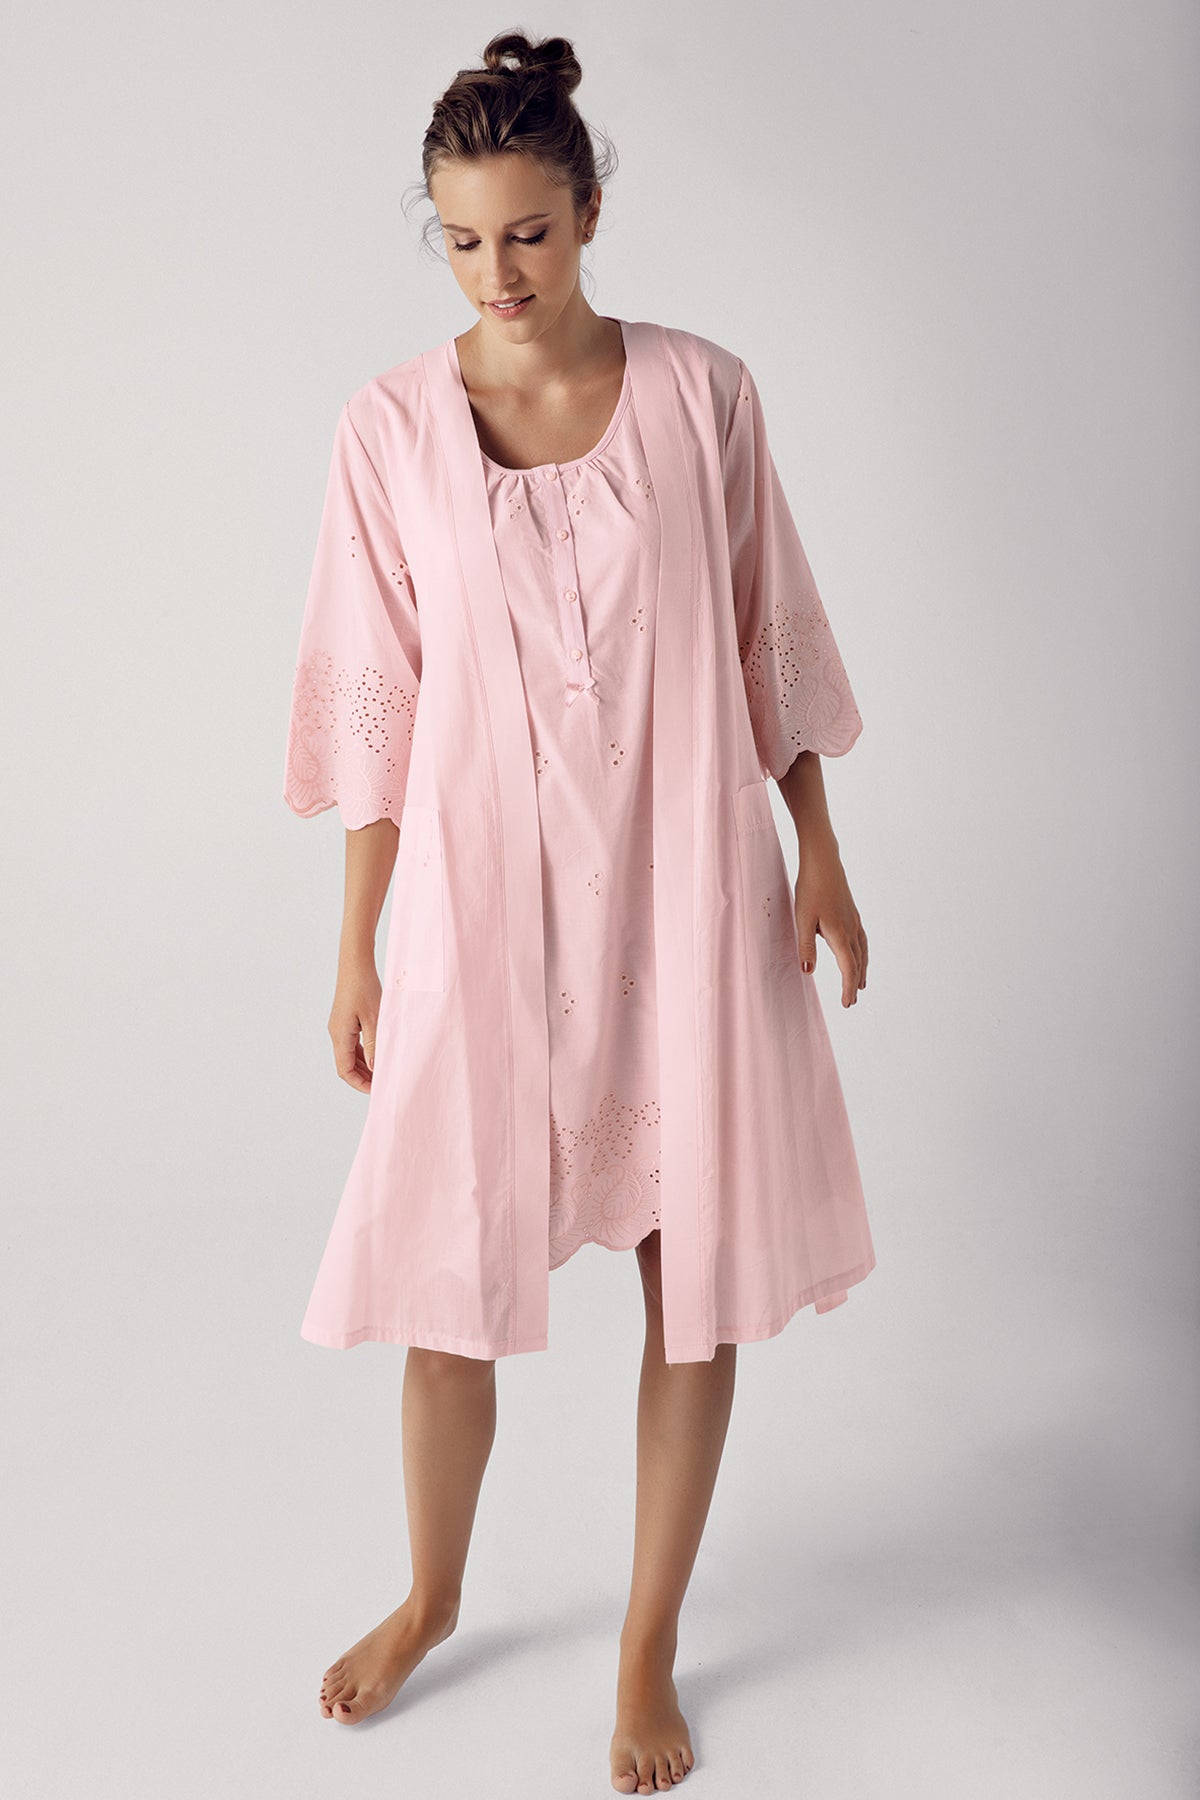 Shopymommy 10402 Cotton Weaving Maternity & Nursing Nightgown With Robe Powder